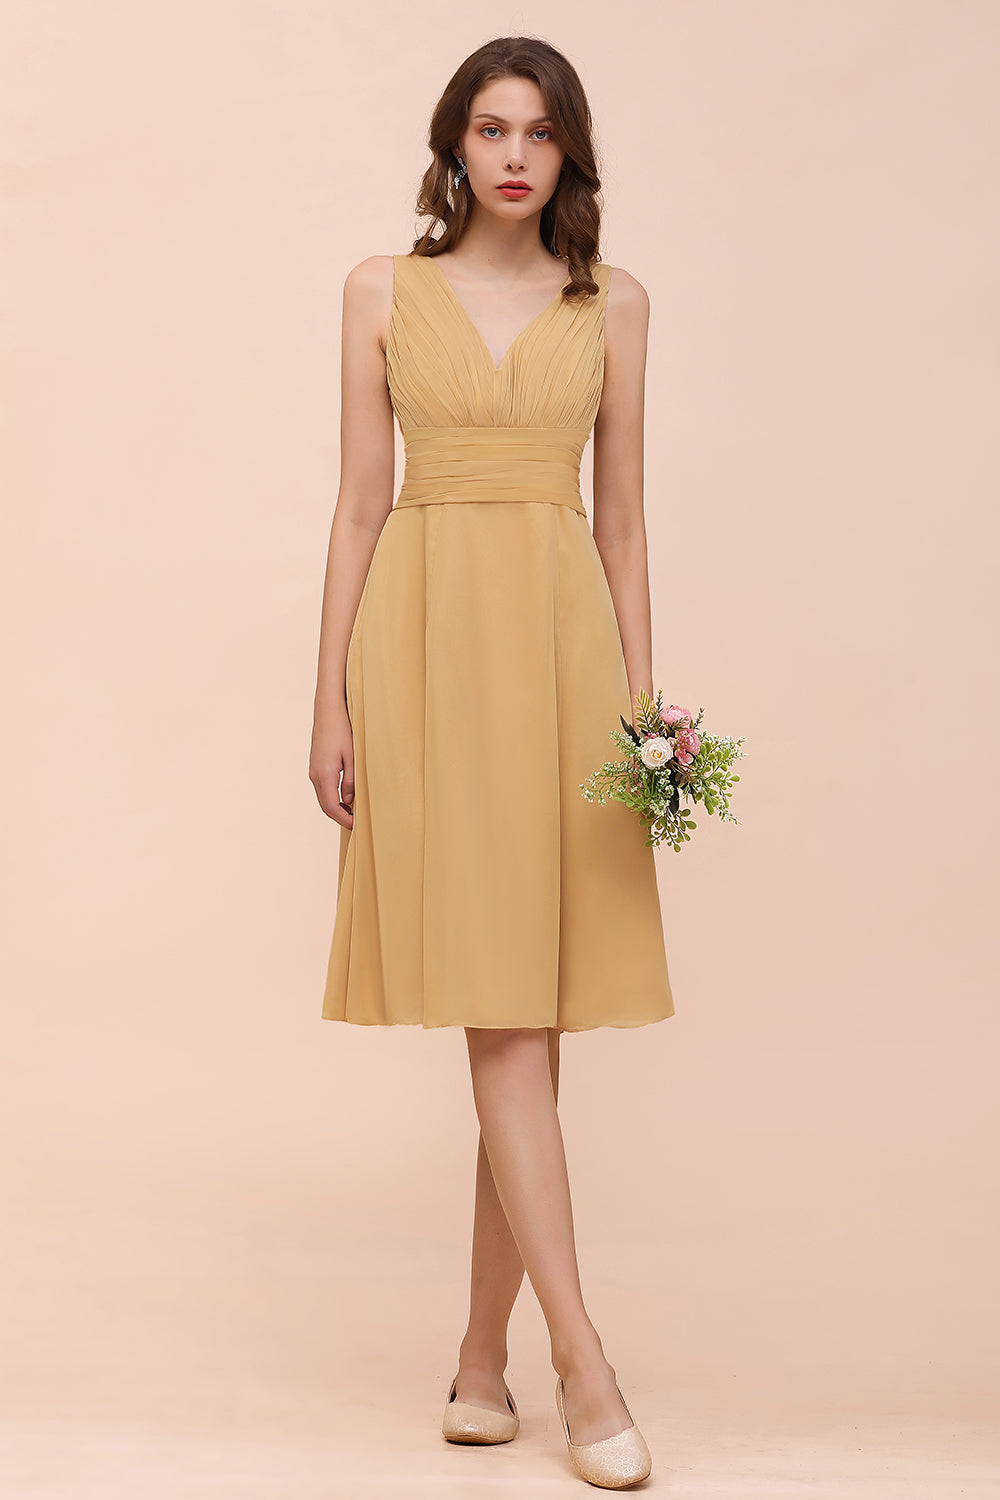 Affordable V-Neck Ruffle Gold Short Bridesmaid Dresses with Bow